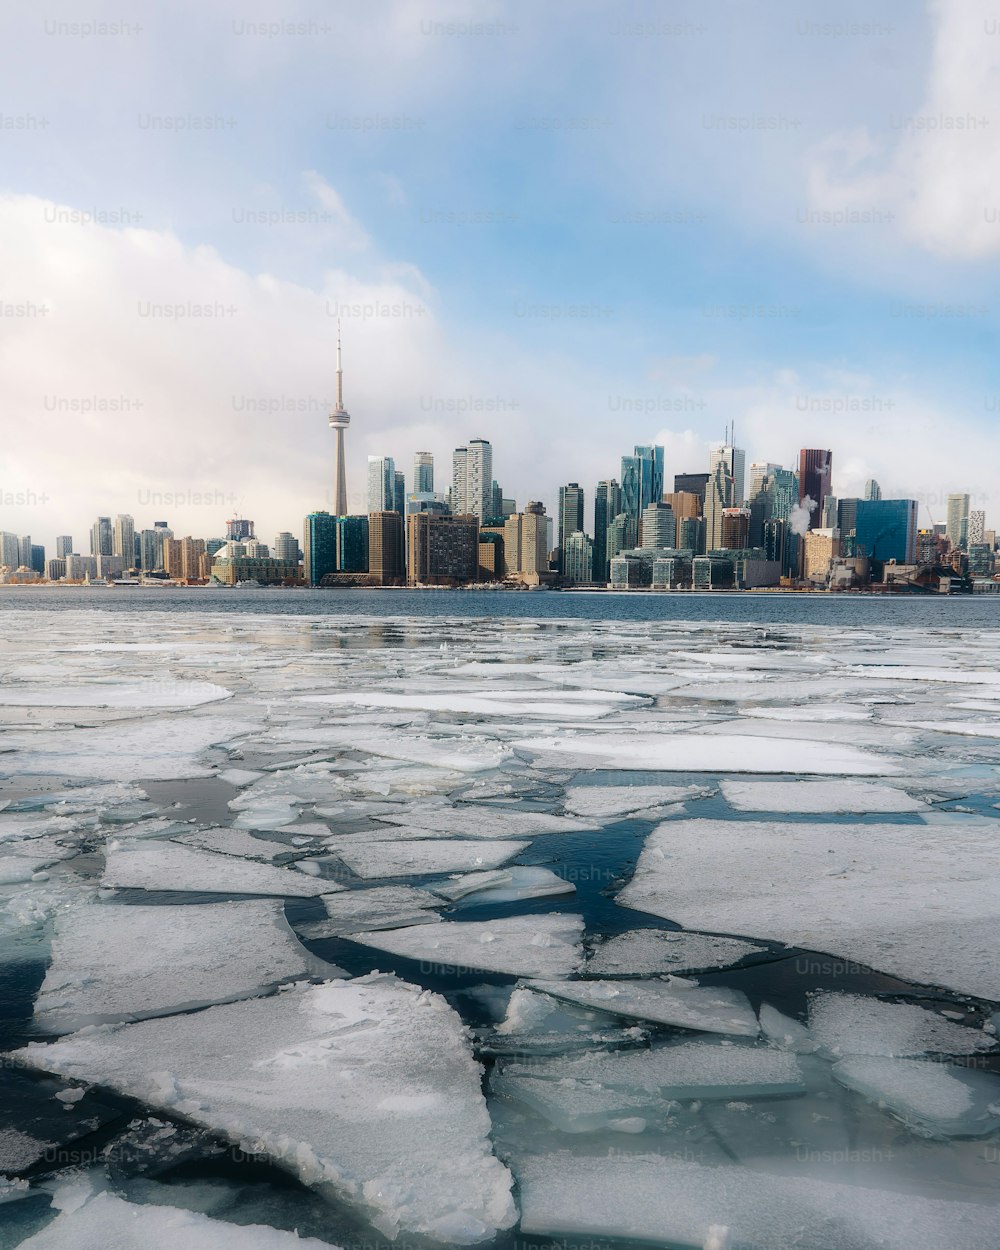 A vertical shot of the frozen river with tall buildings of Toronto in the background, Canada